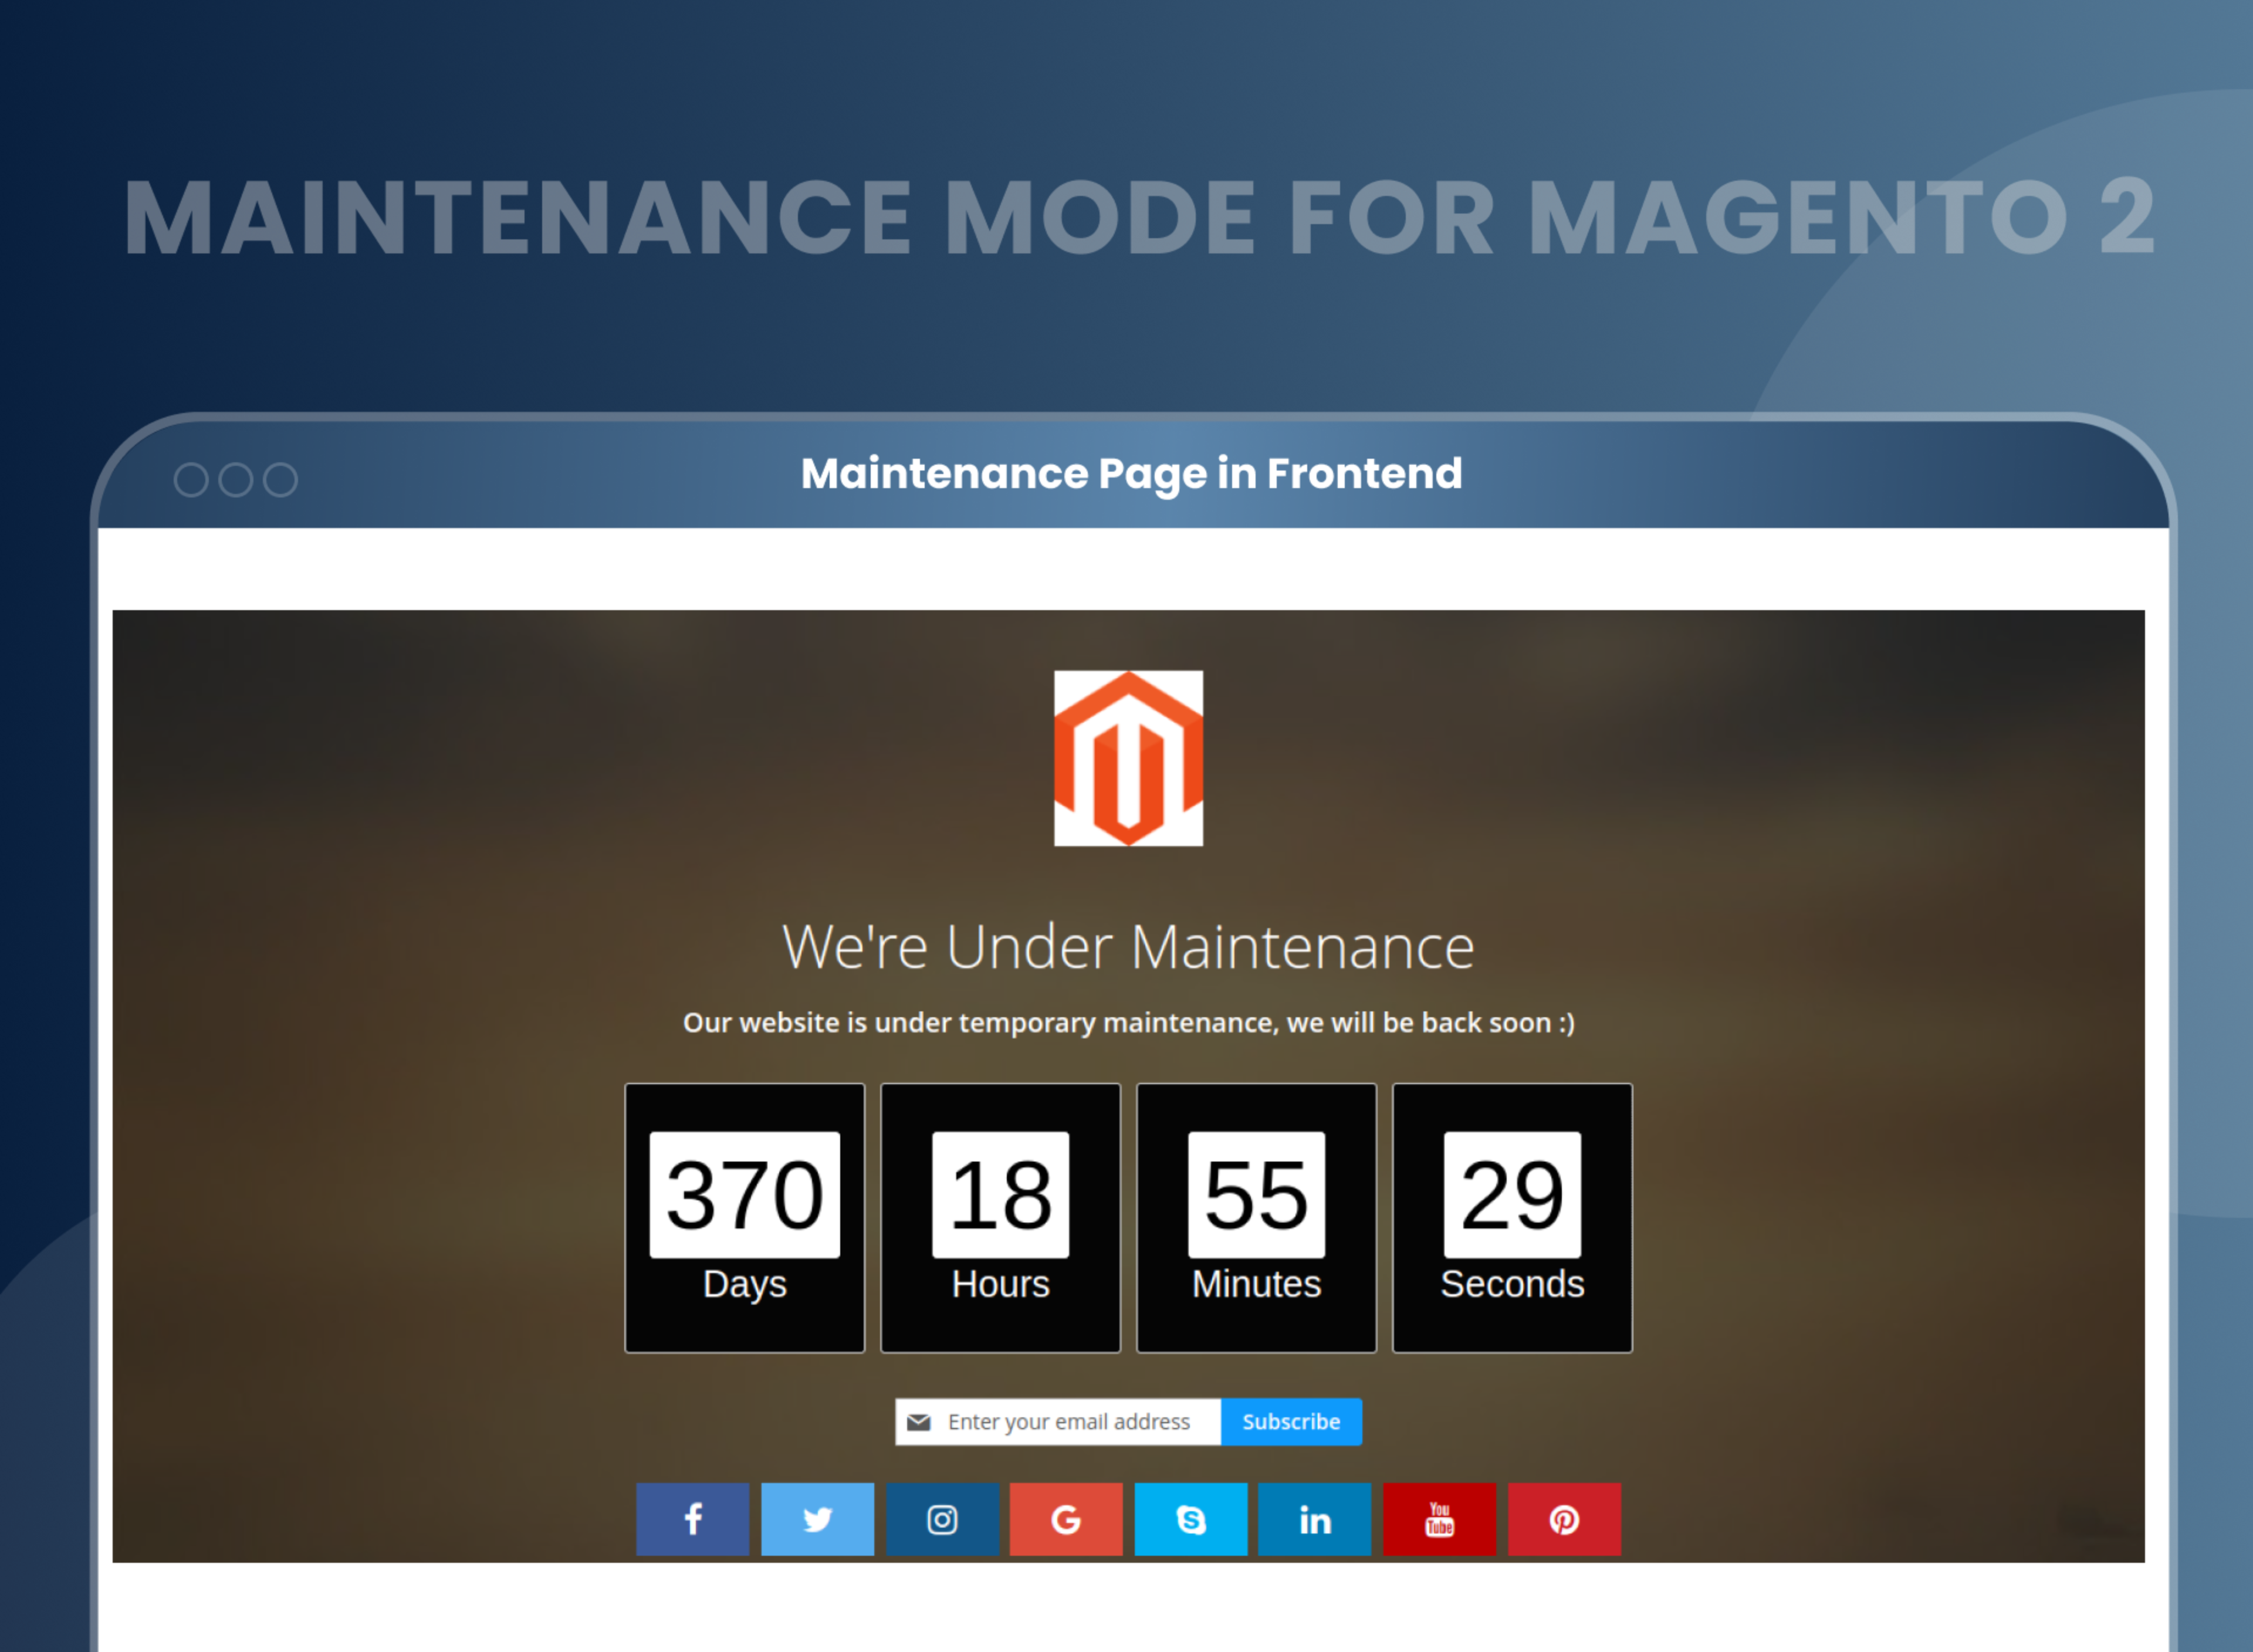 Maintenance Page in Frontend